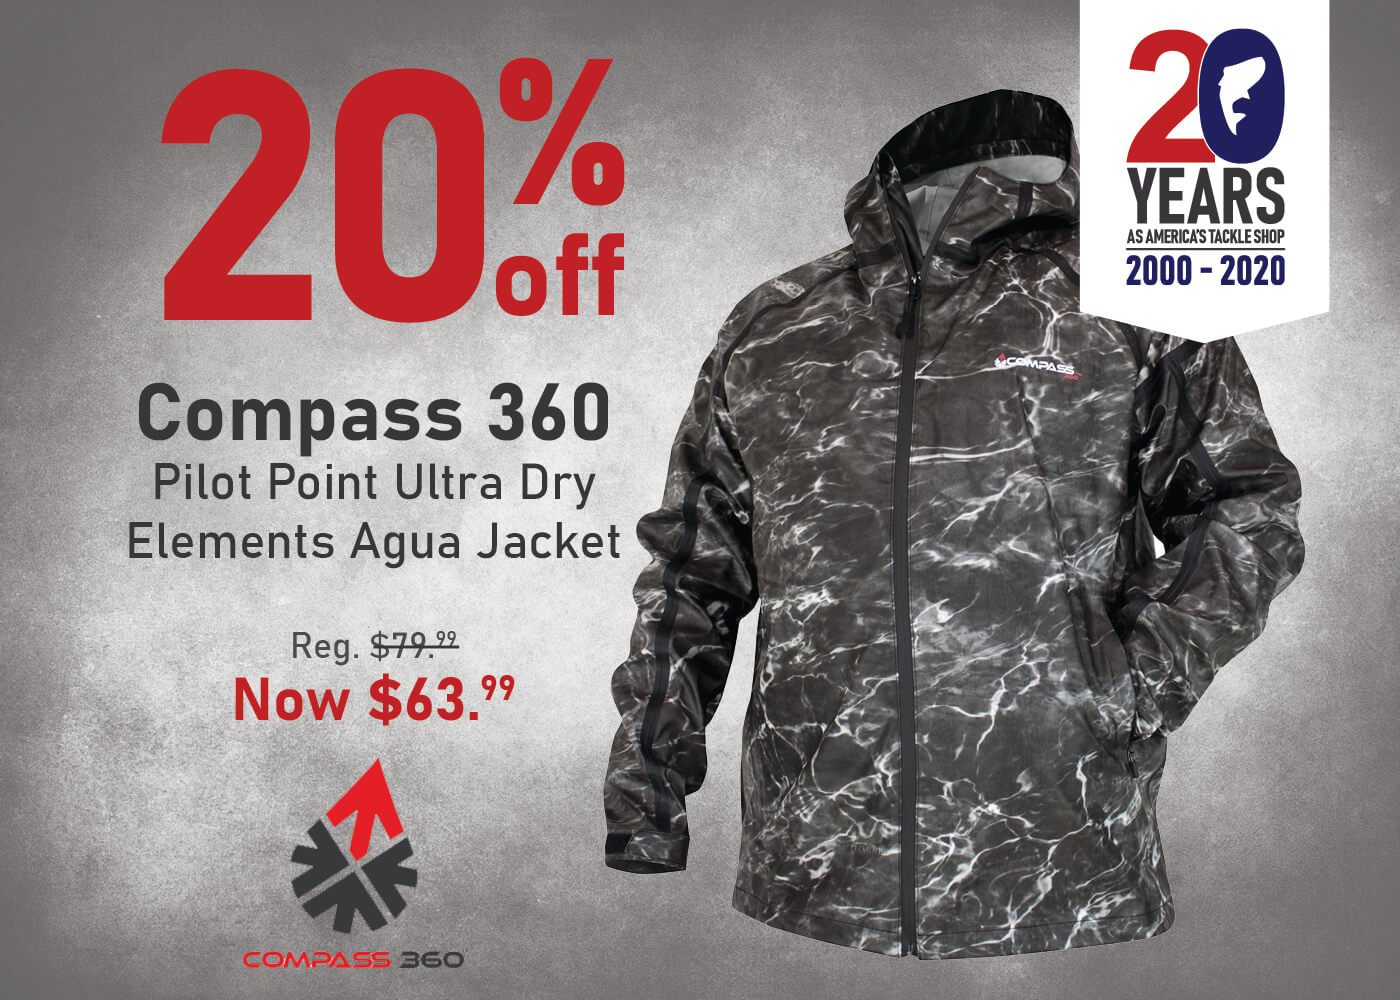 Save 20% on the Compass 360 Pilot Point Ultra Dry Elements Agua Jacket